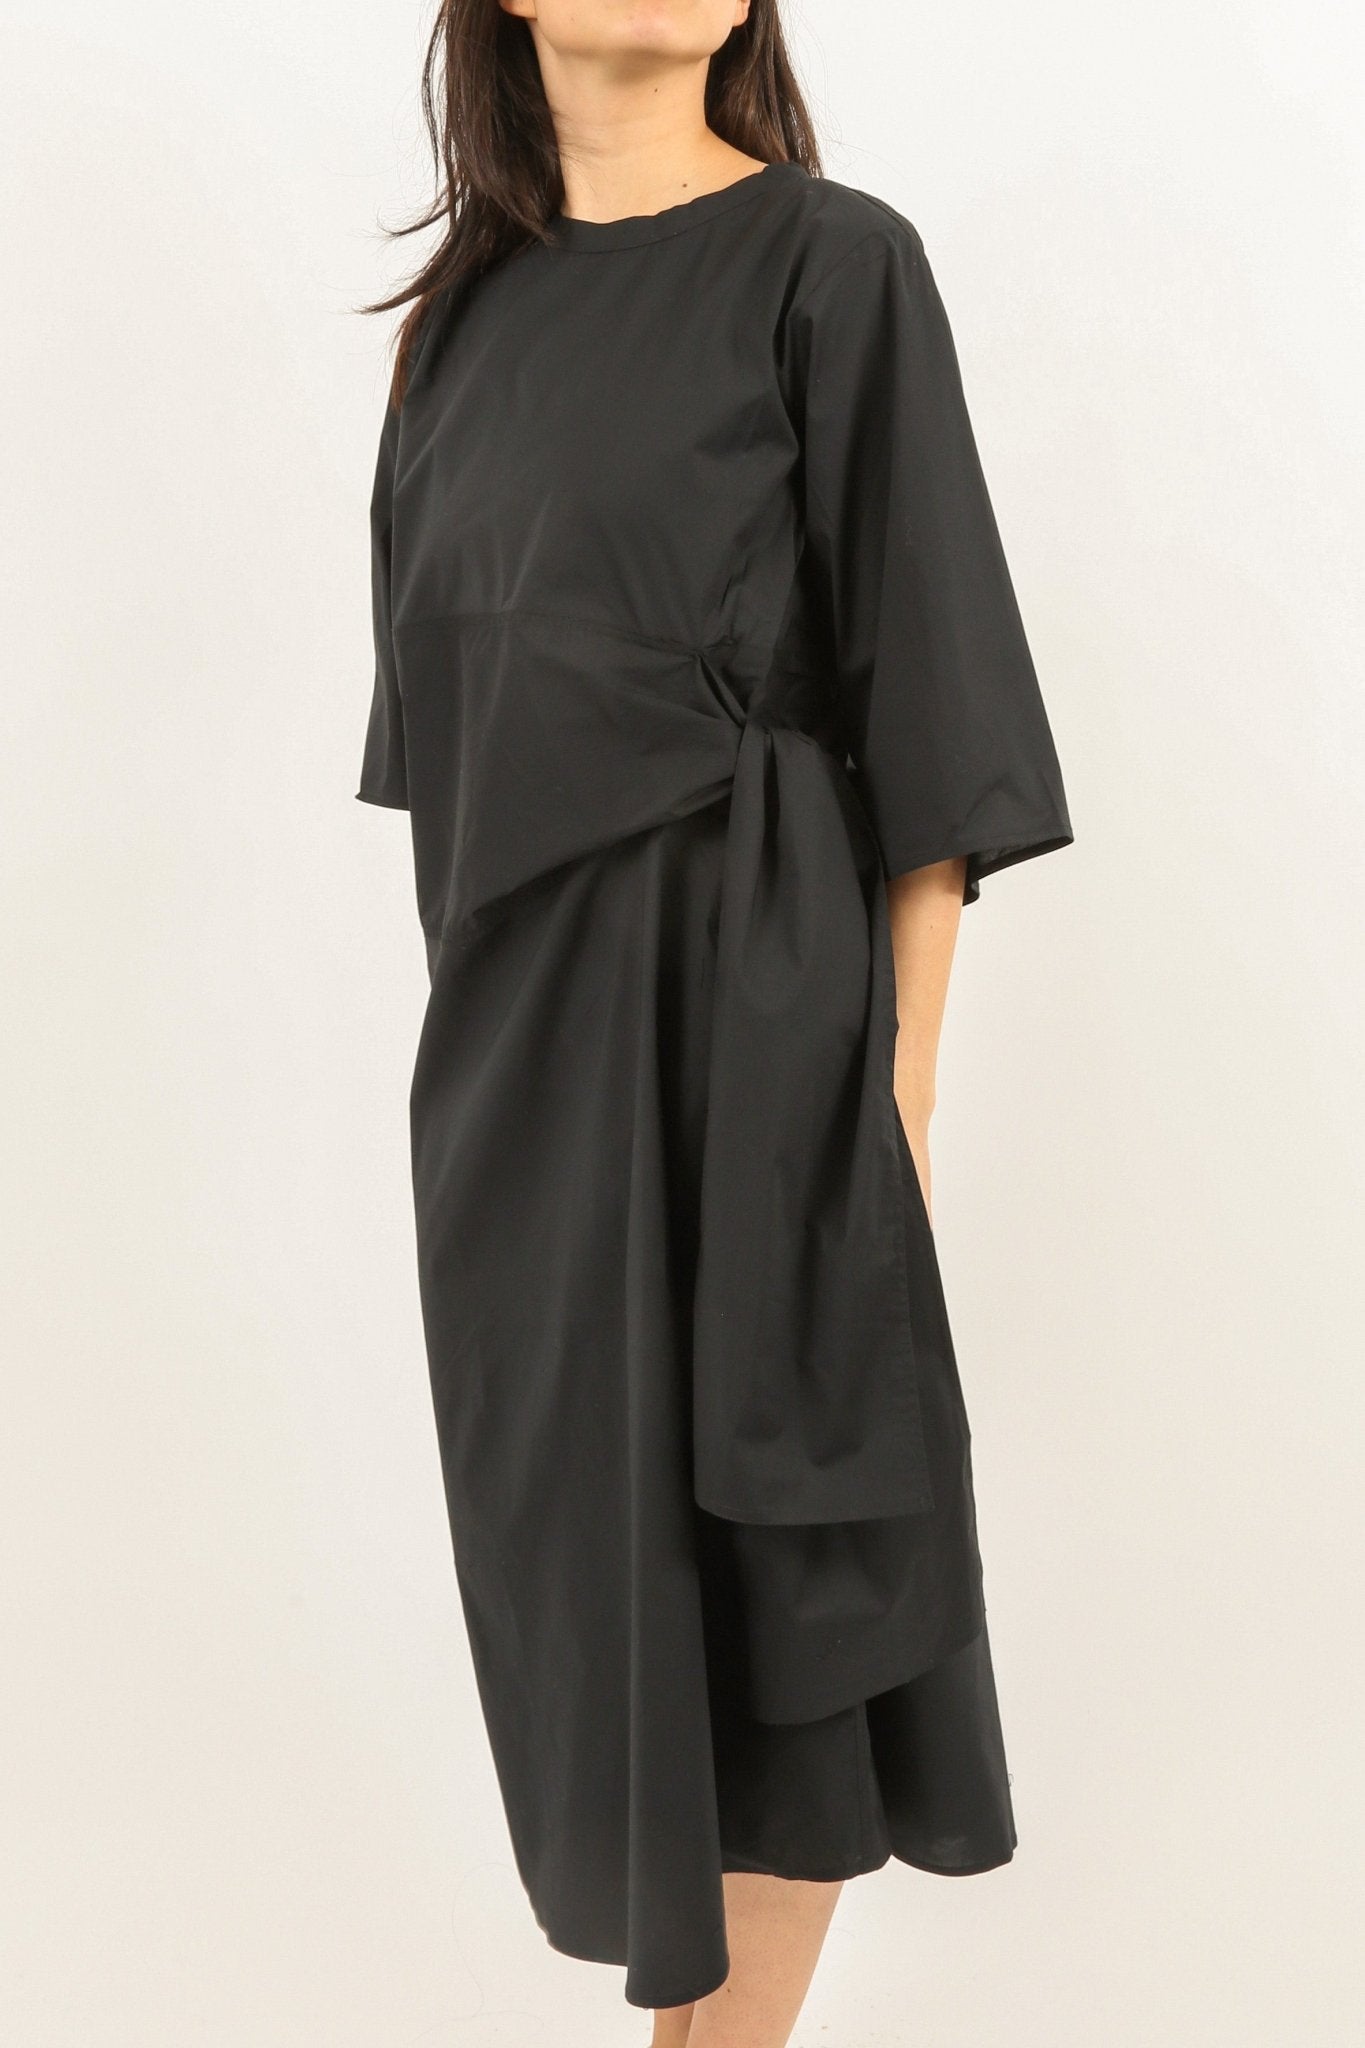 Cotton dress with side ties - Woman